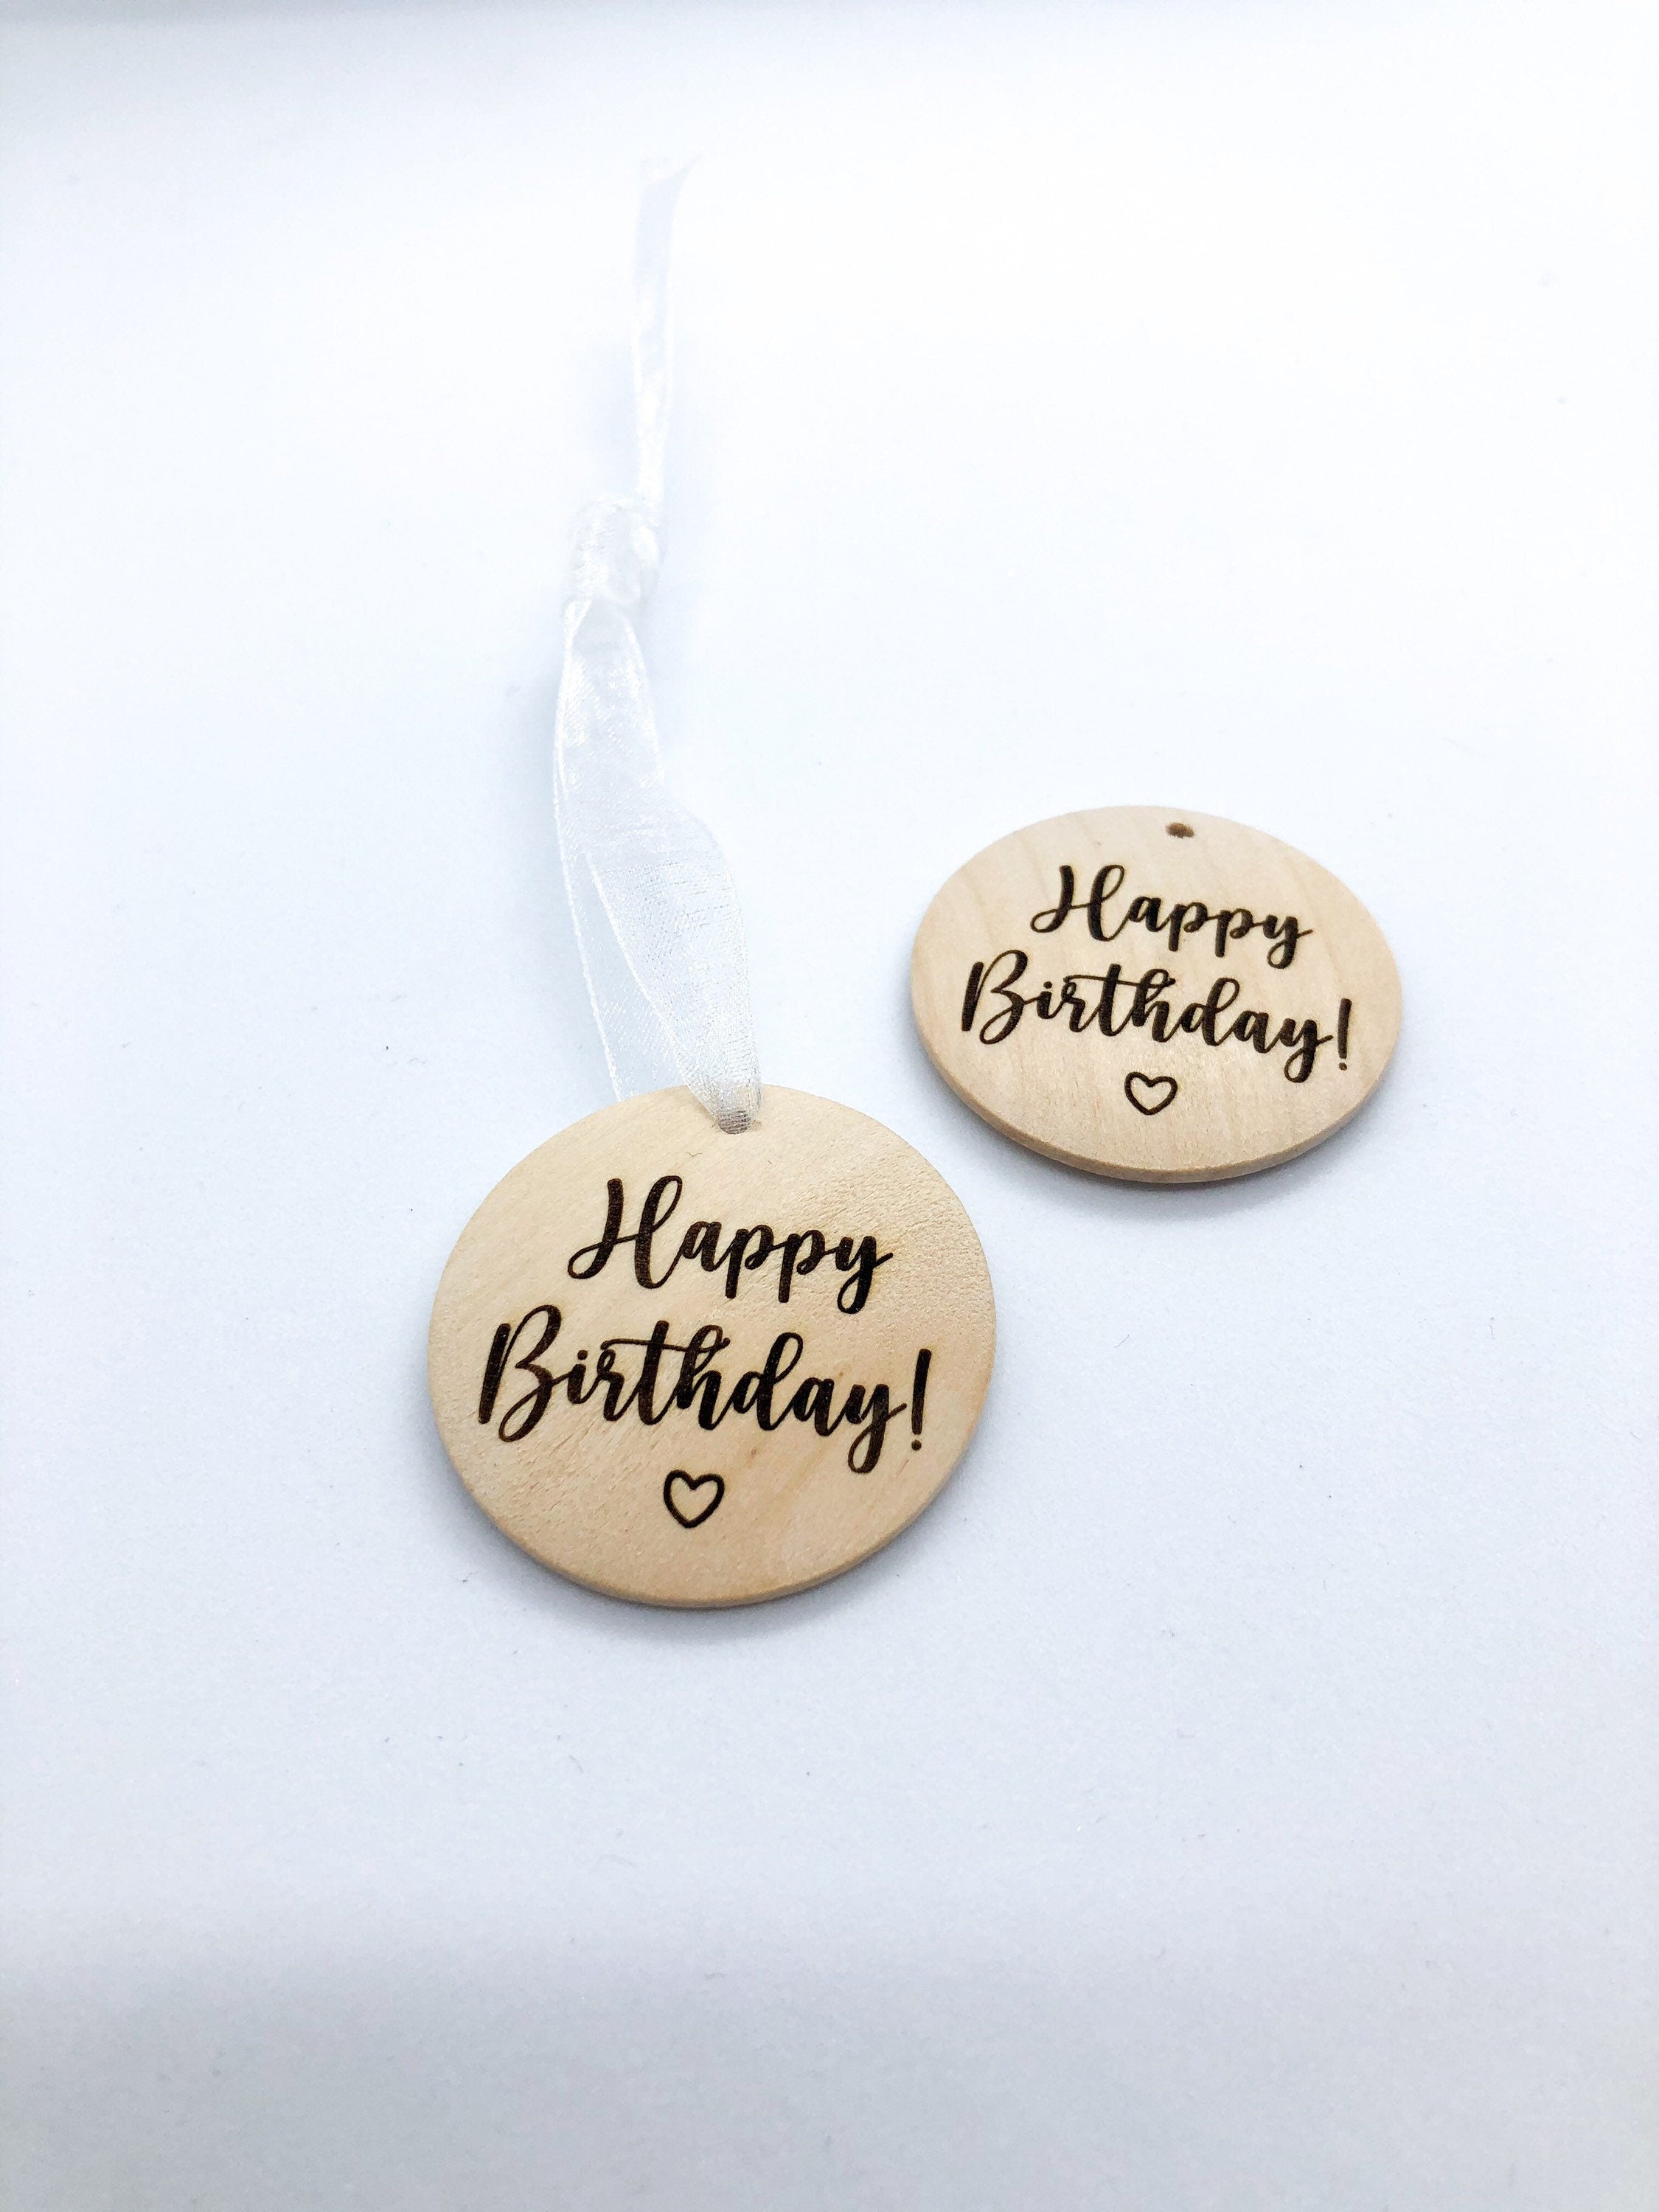 Wooden Happy Birthday gift tag